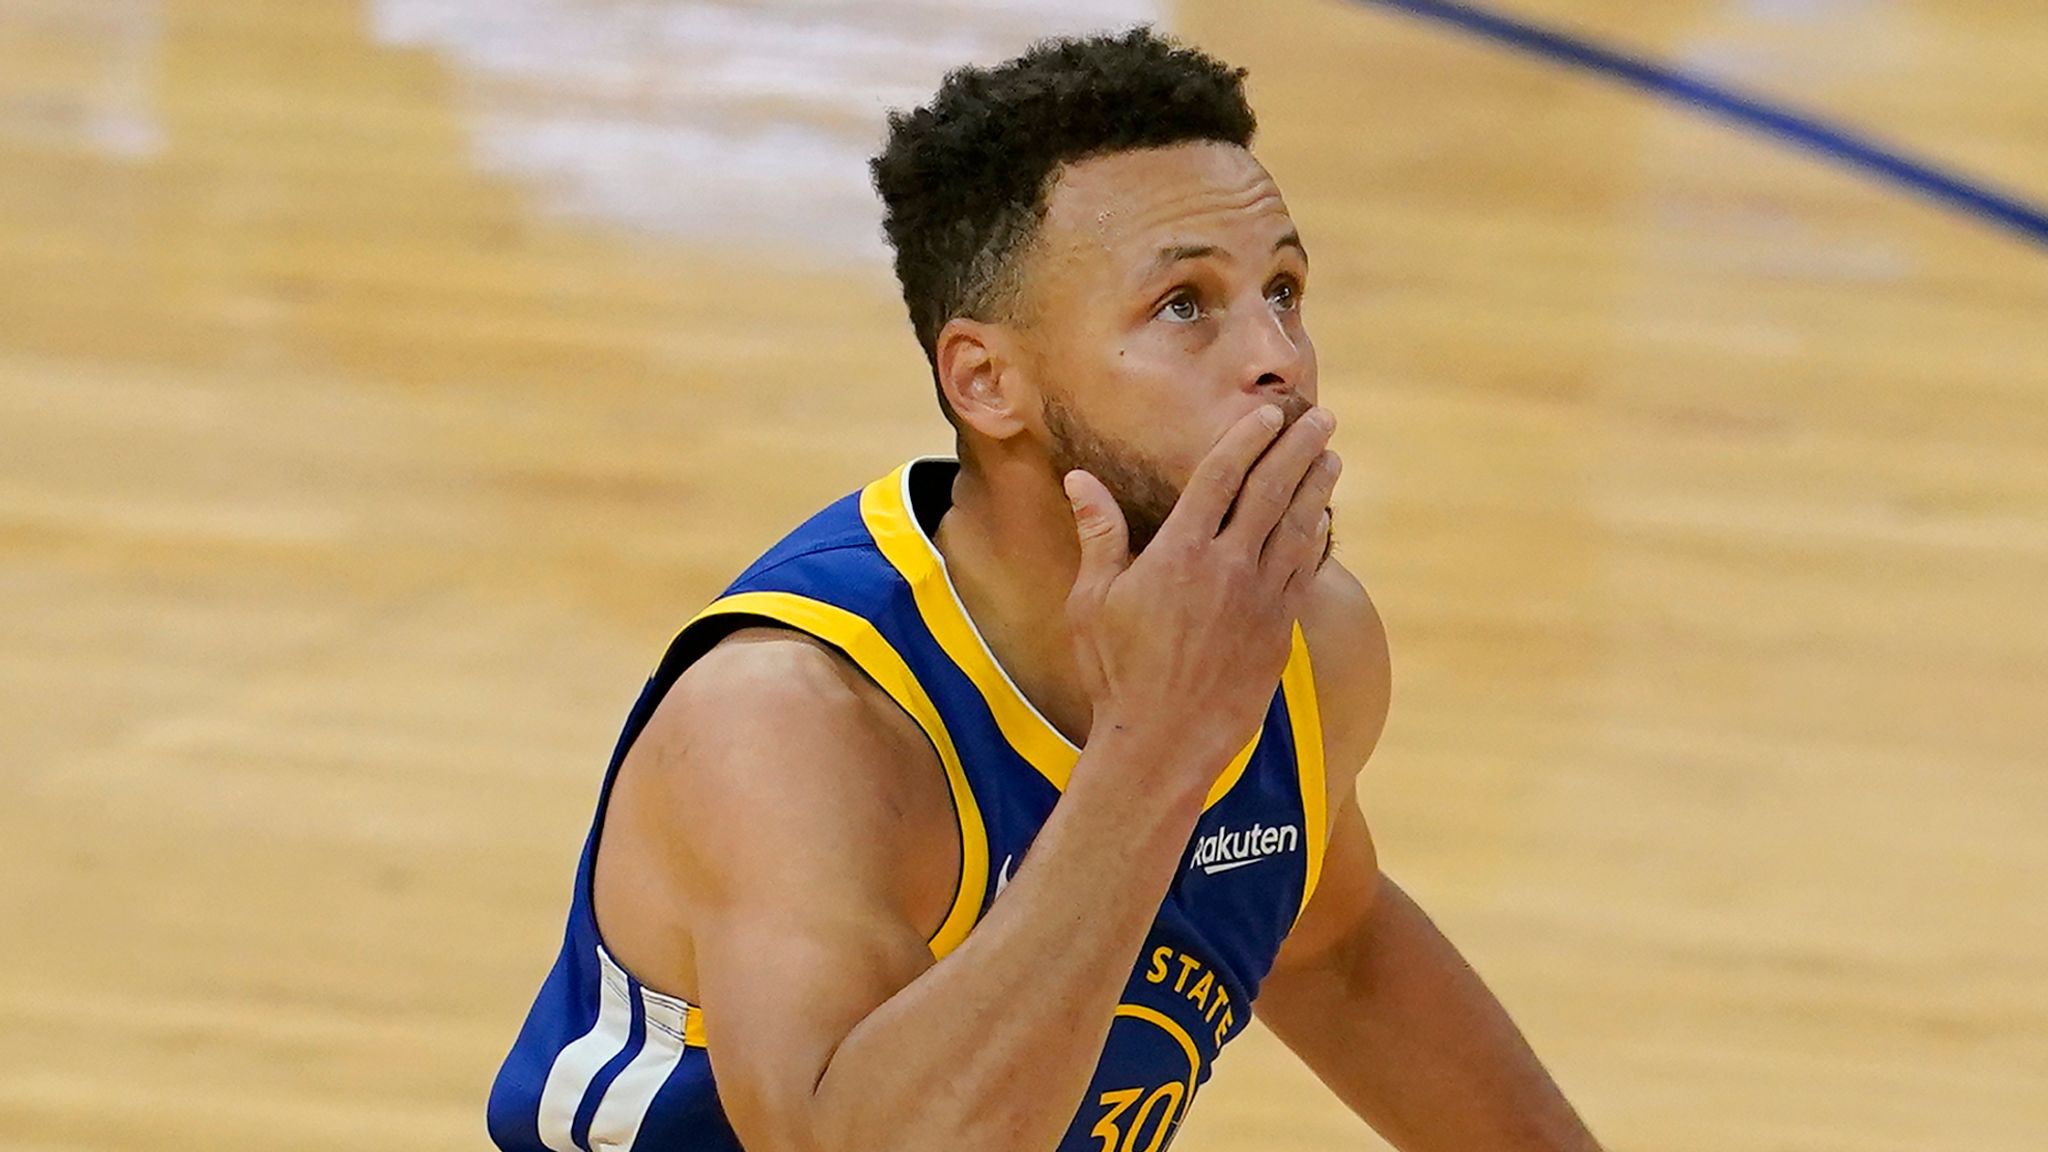 Stephen Curry sets NBA record for 3-pointers in a month with 85